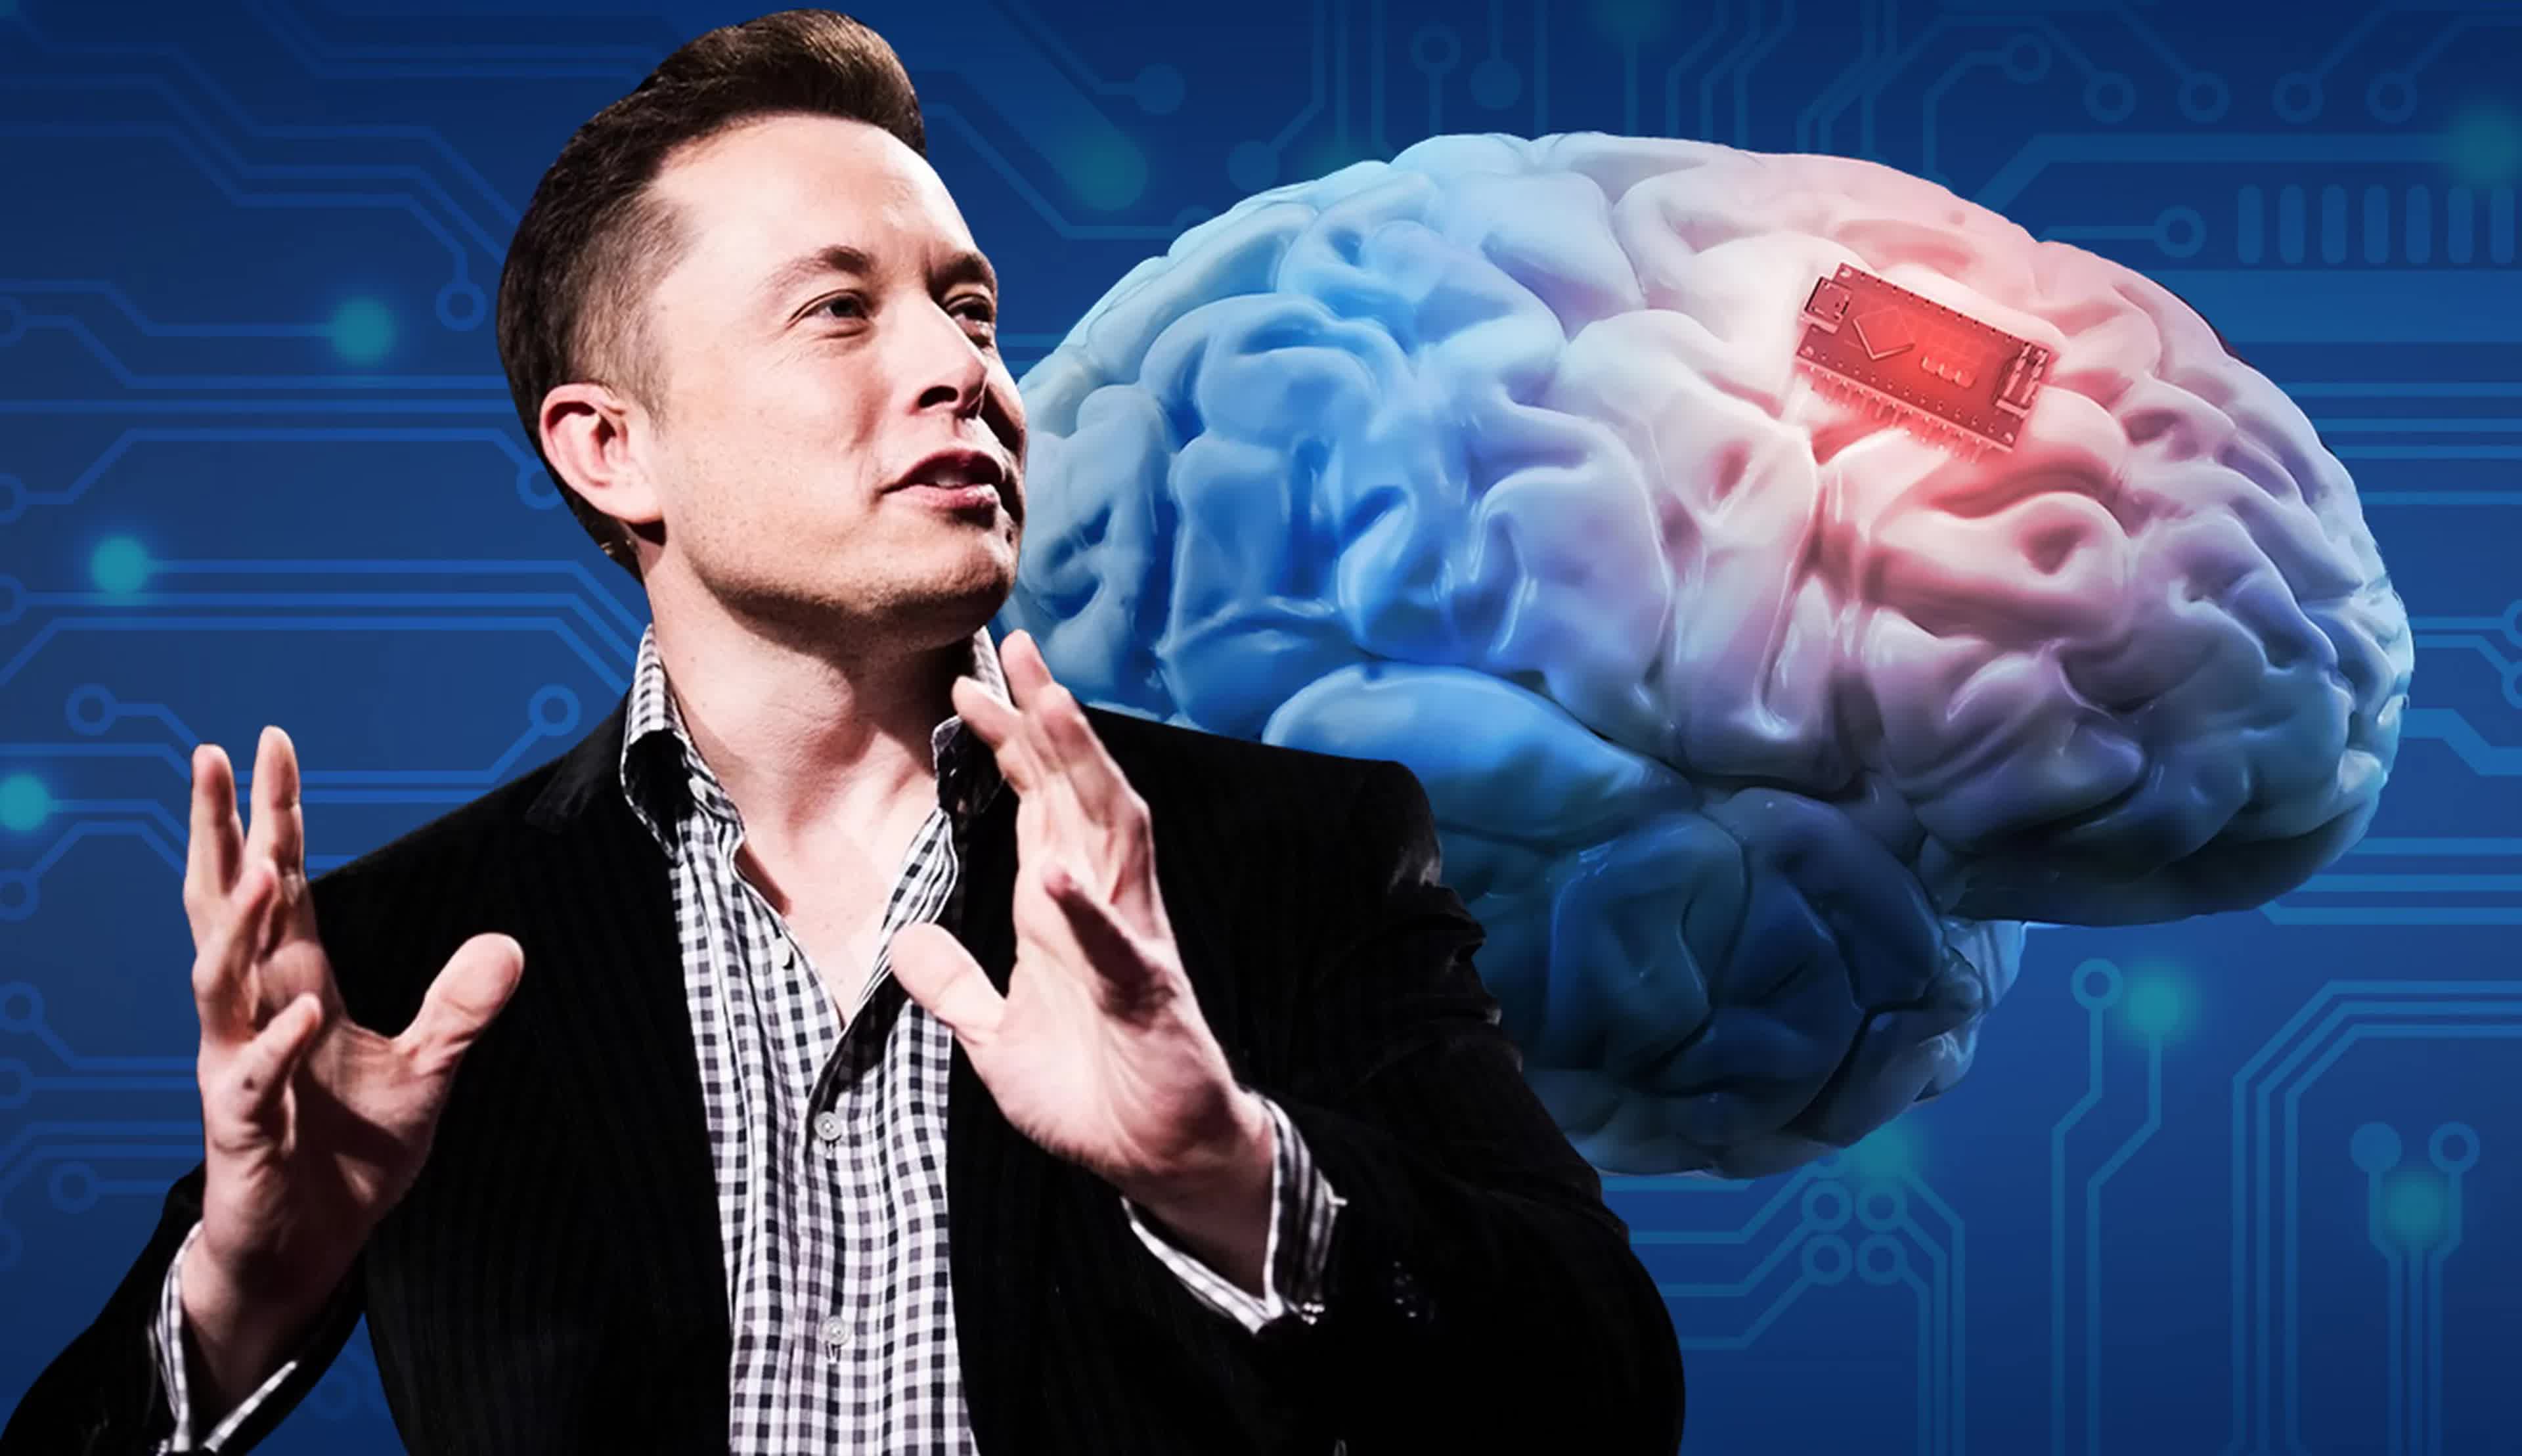 Elon Musk's Neuralink accused of unsafely transporting infected material